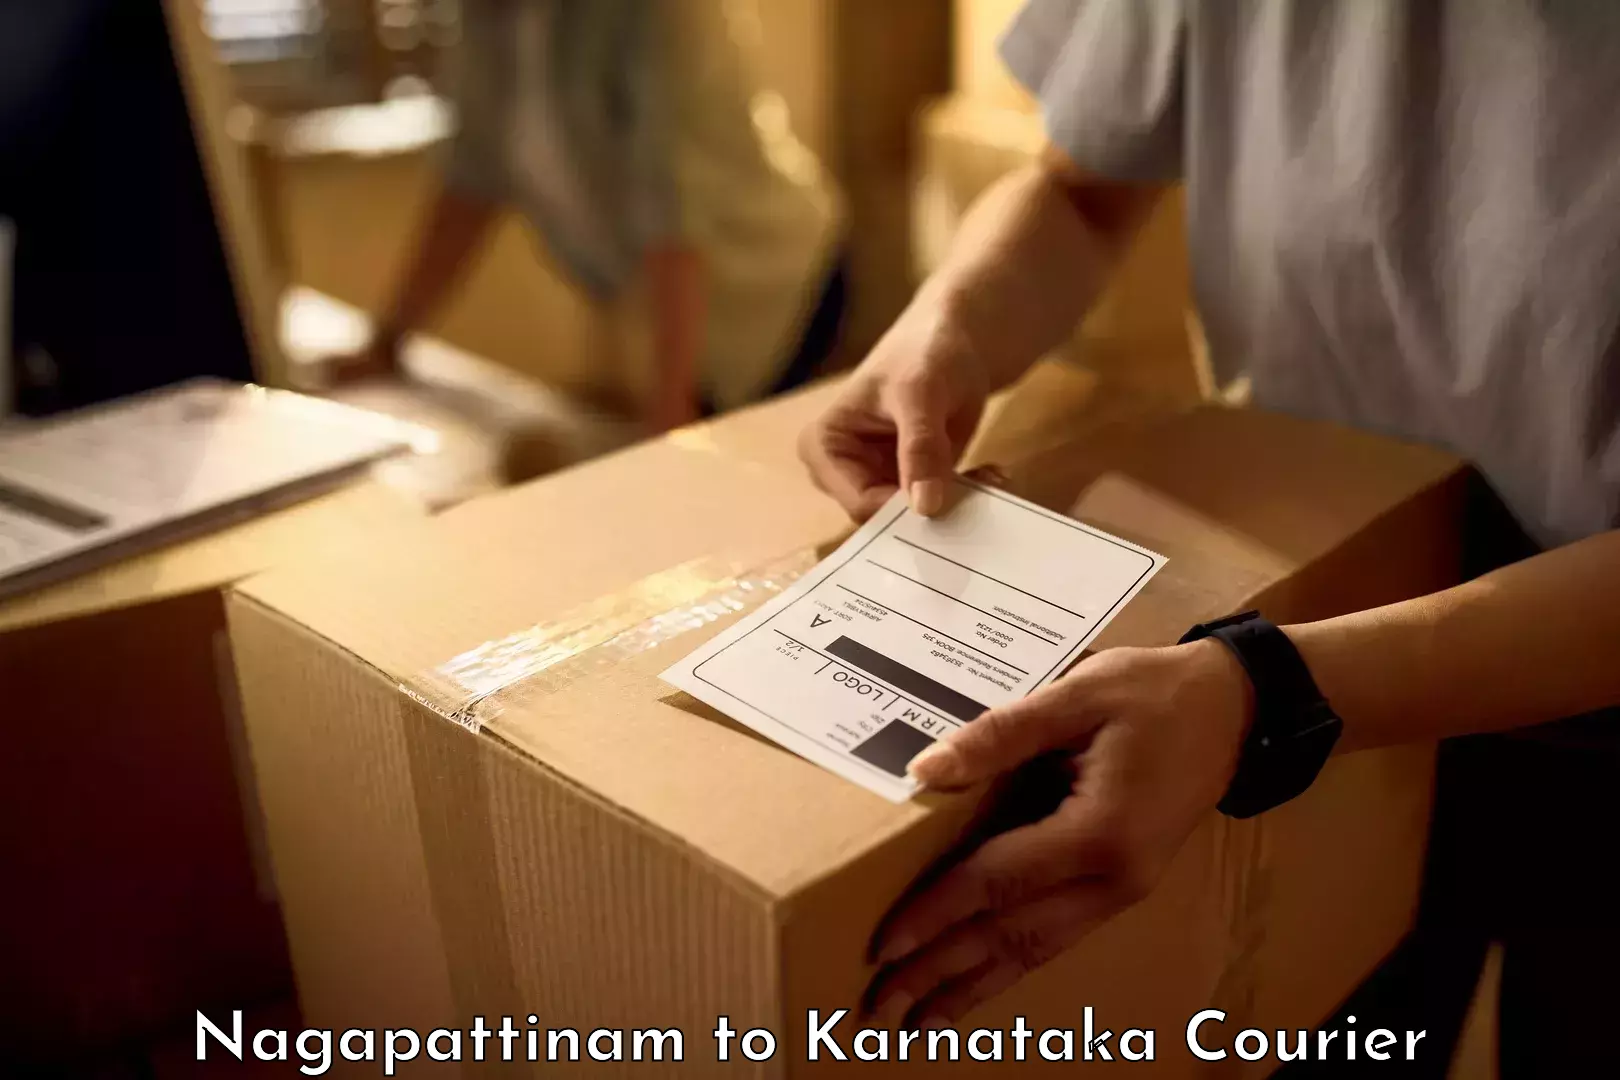 Luggage delivery app Nagapattinam to Gonikoppal